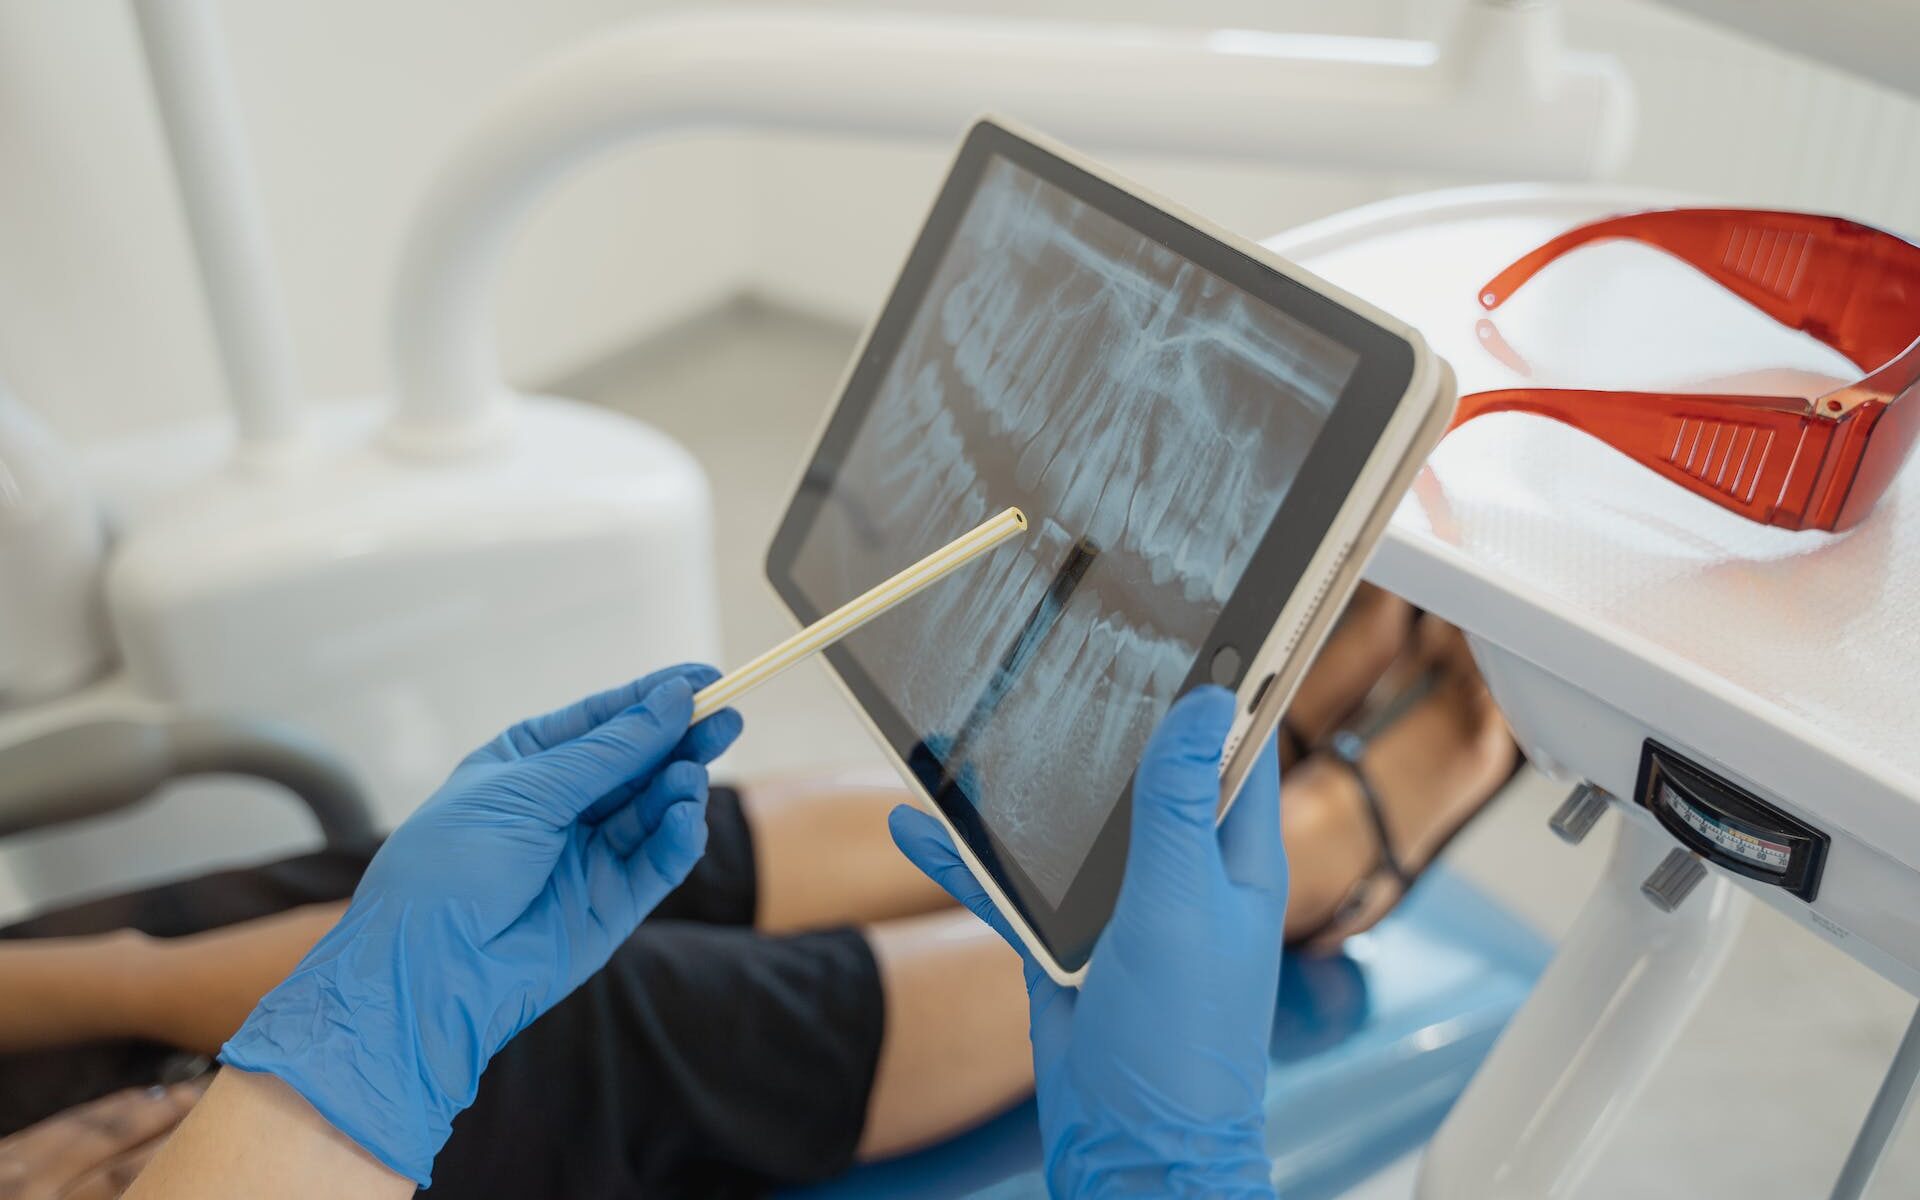 What Is the ADA’s Latest Advice on the Use of Radiographic Exams in Dentistry?